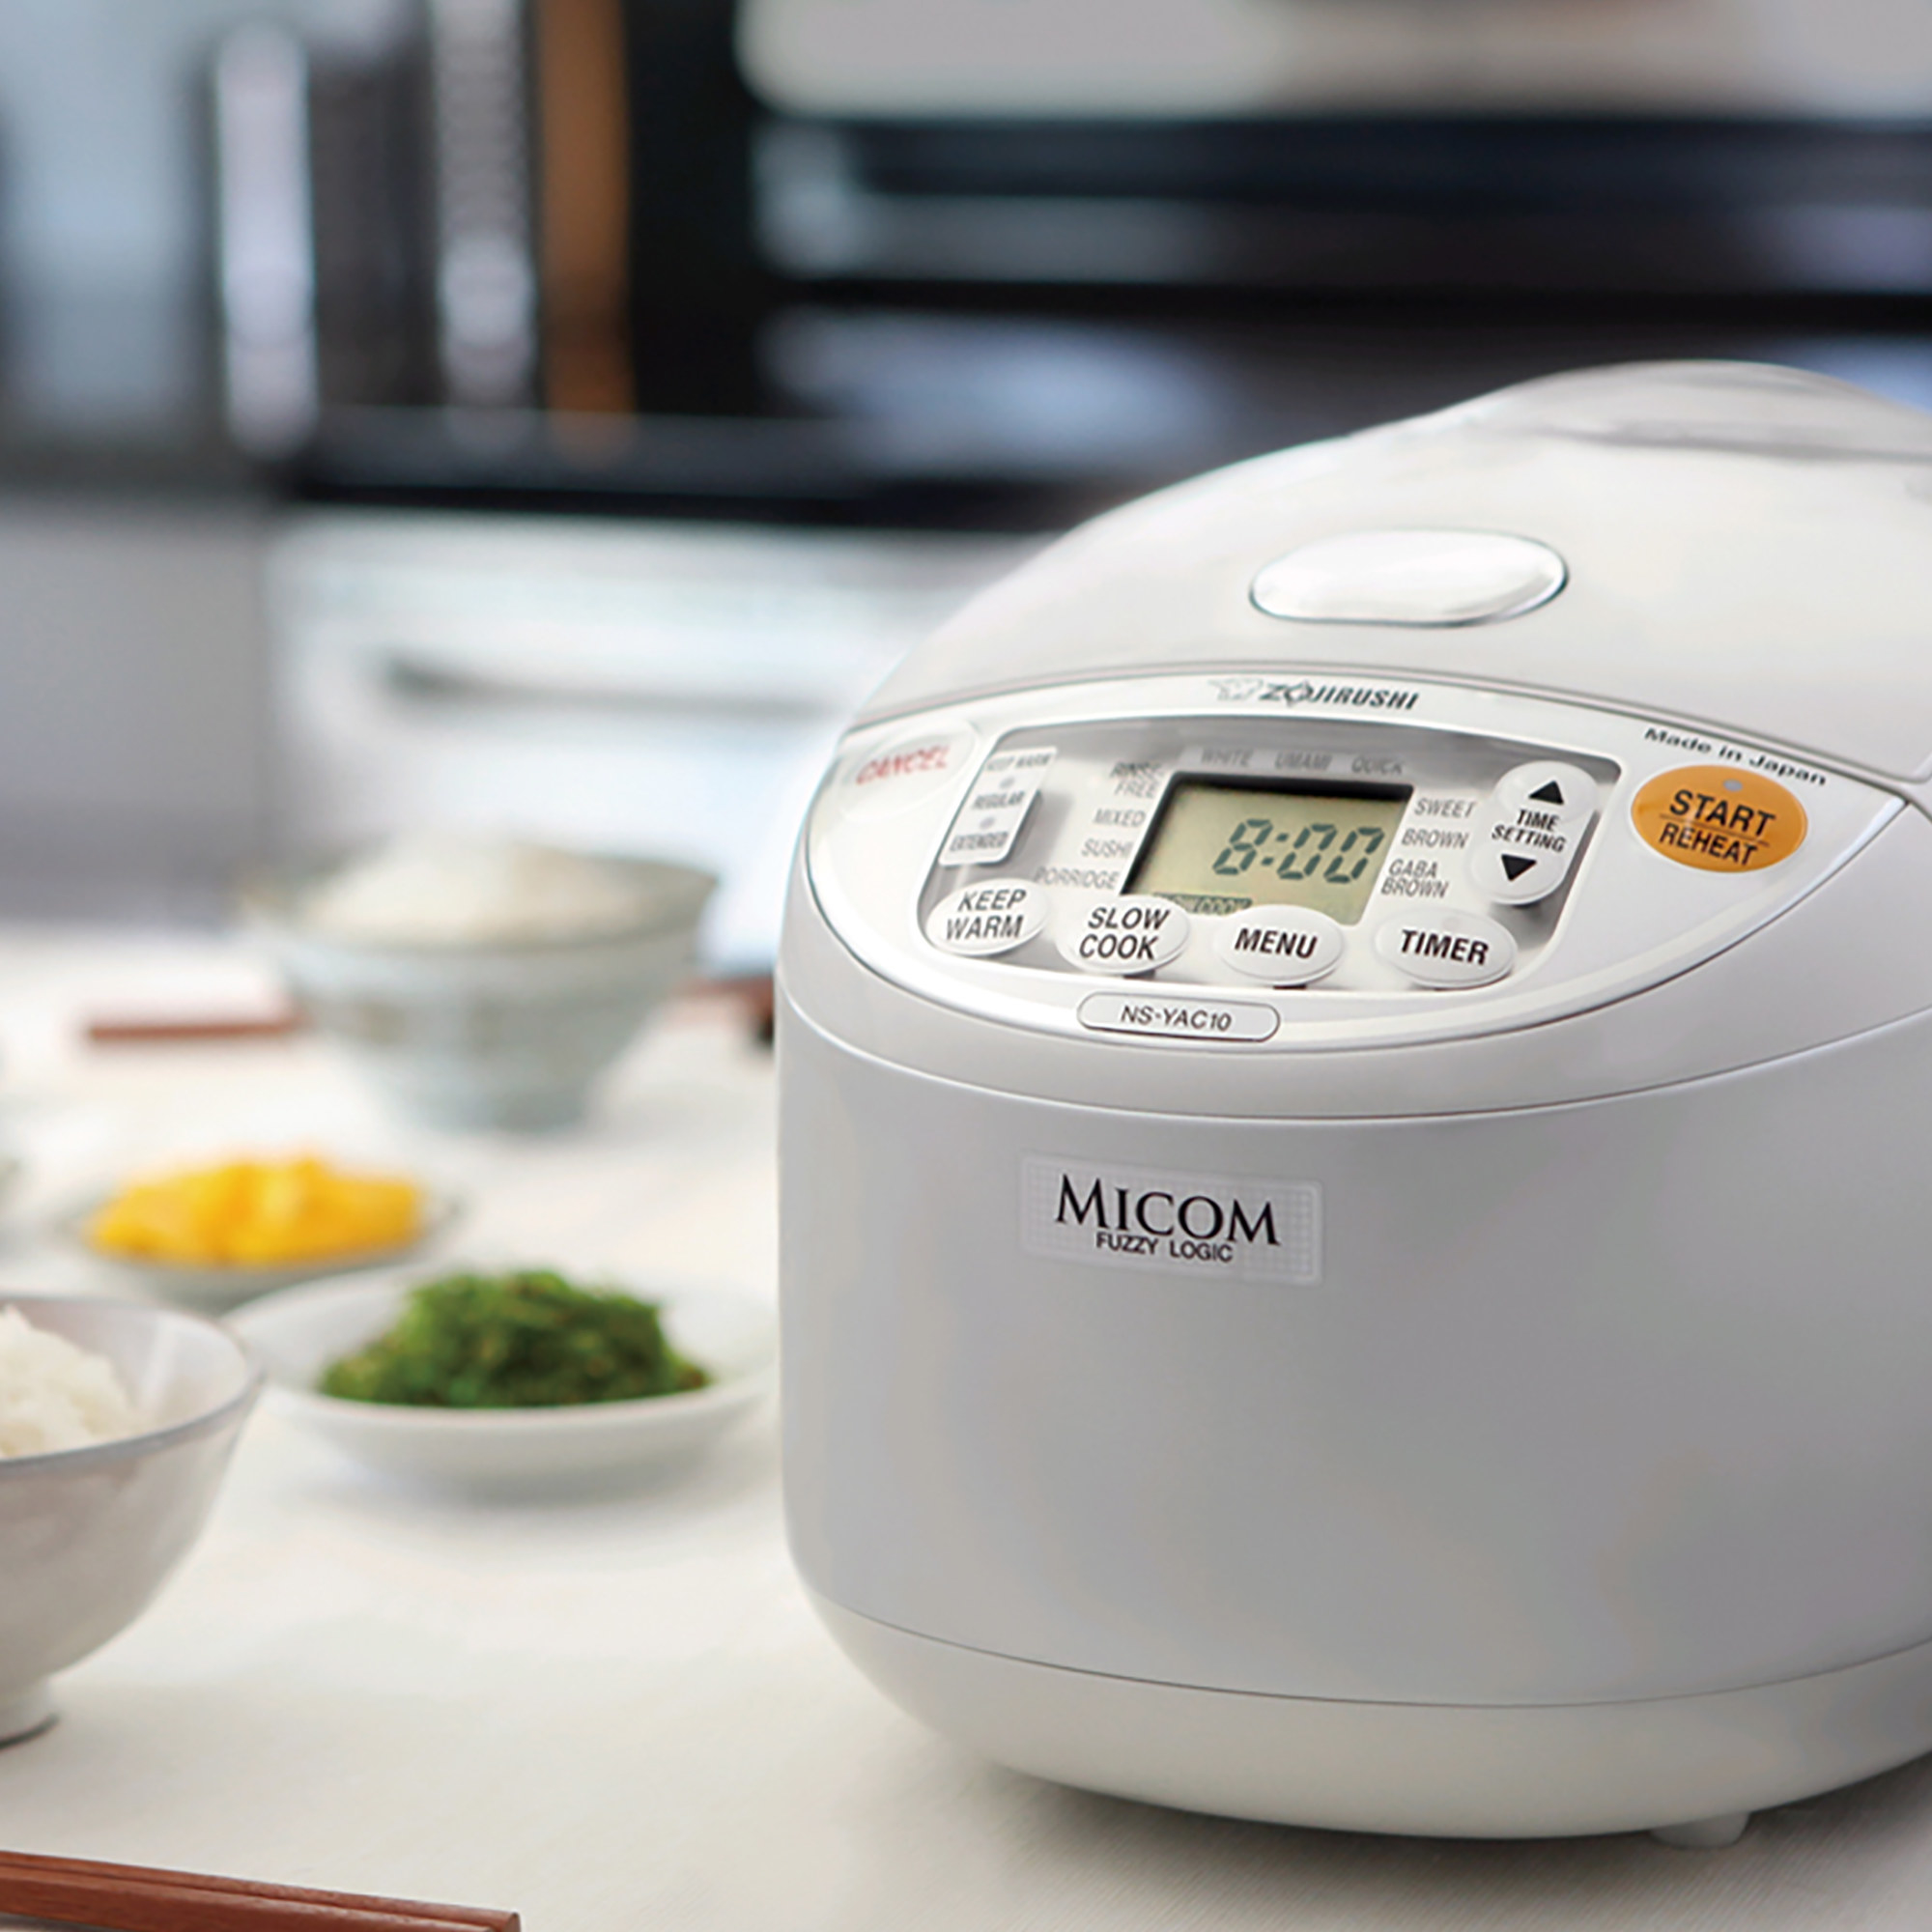 the white rice cooker which has a small digital screen and a handful of buttons